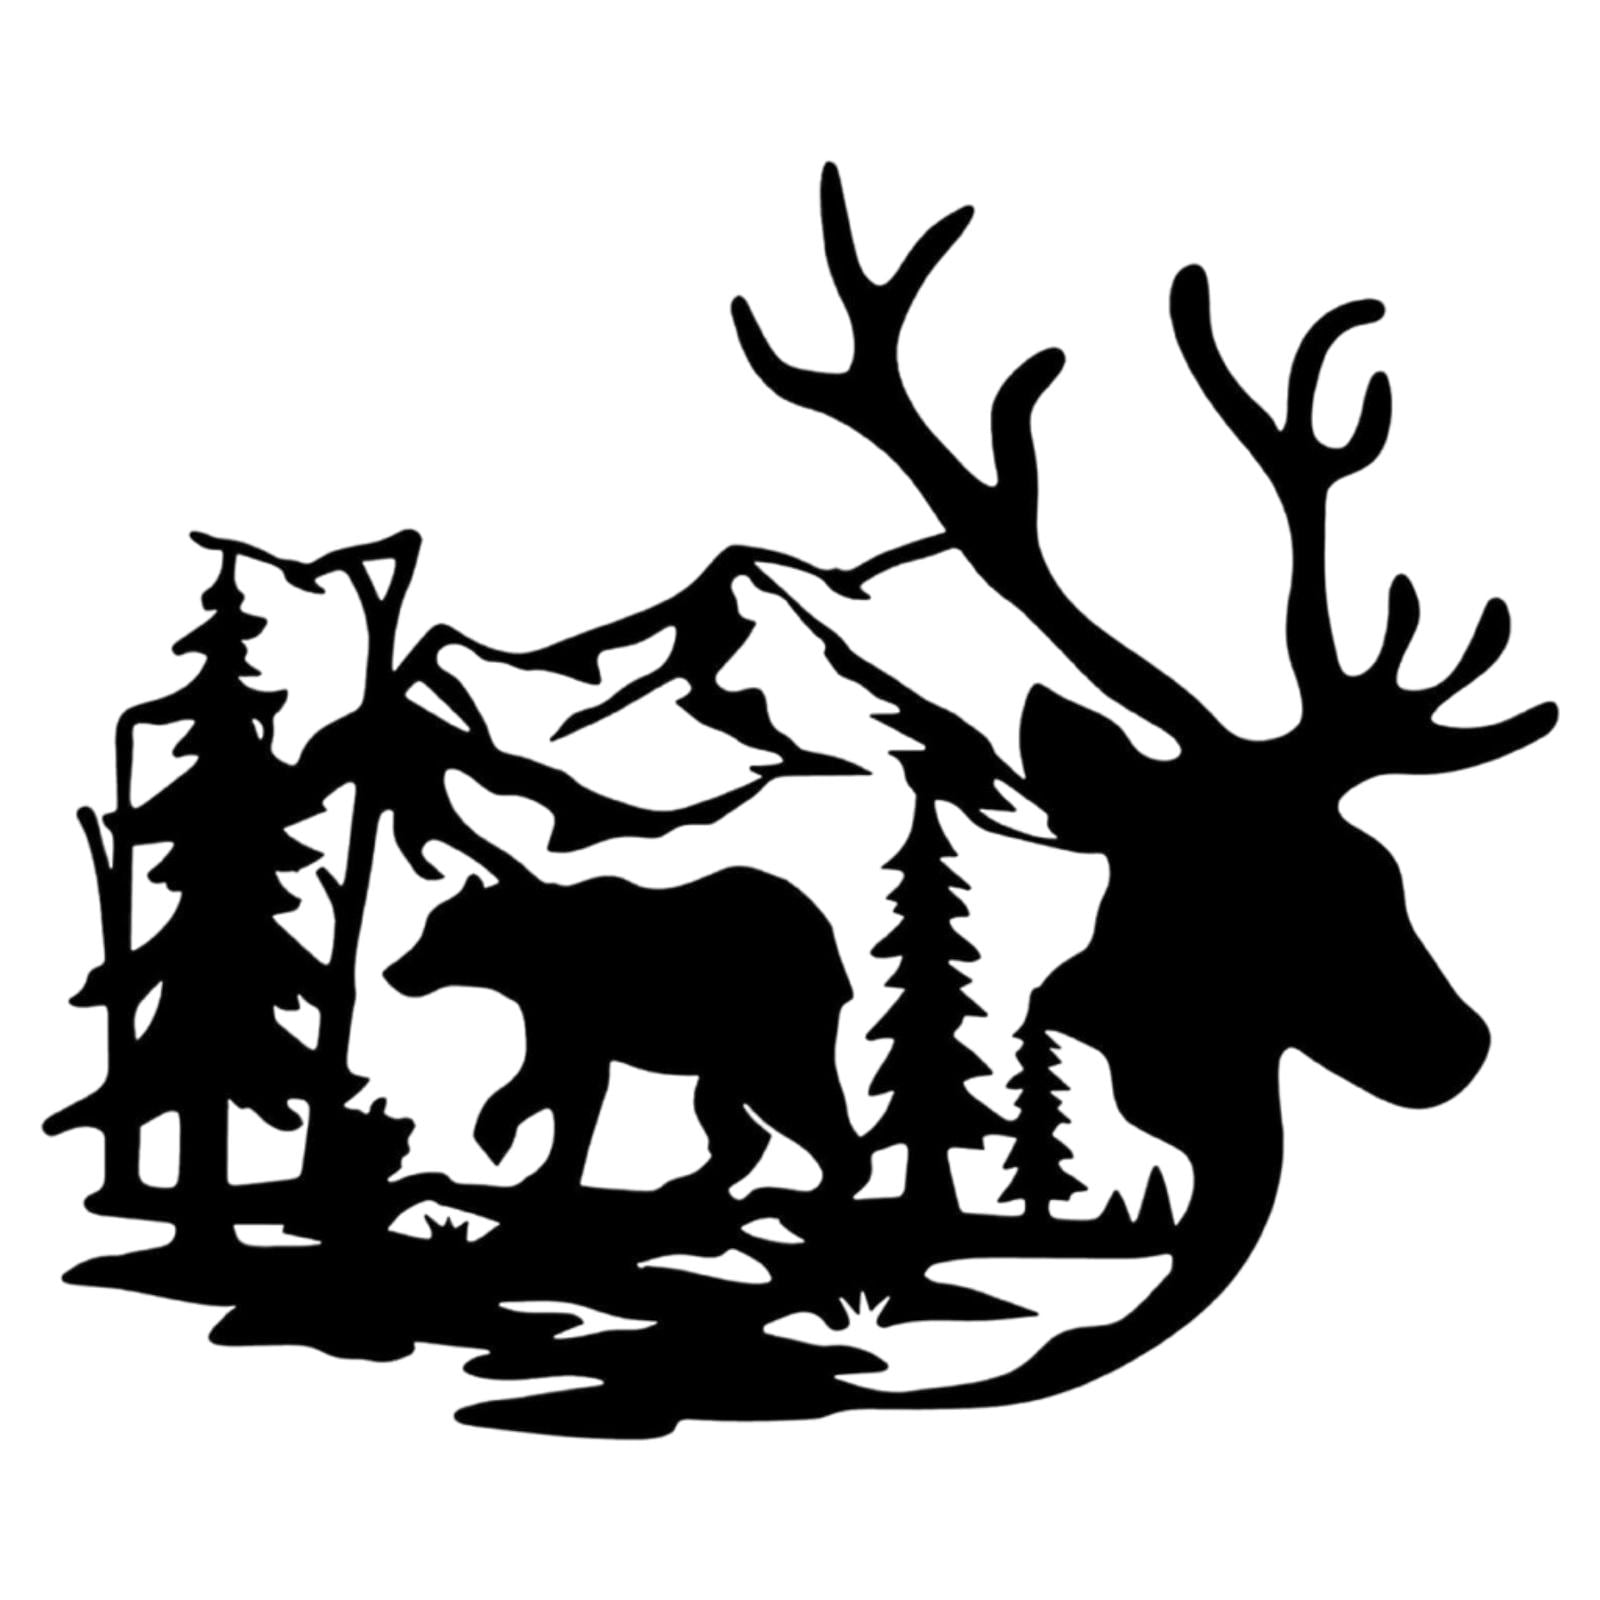 Bear Family Metal Wall Art Personalized Wildlife Christmas Decor Stainless Steel Welcome Gift Metal Wall Sculpture Forest Mountain For Home Office Living Room Bedroom Series 14 Size 18 Inches Diagonal